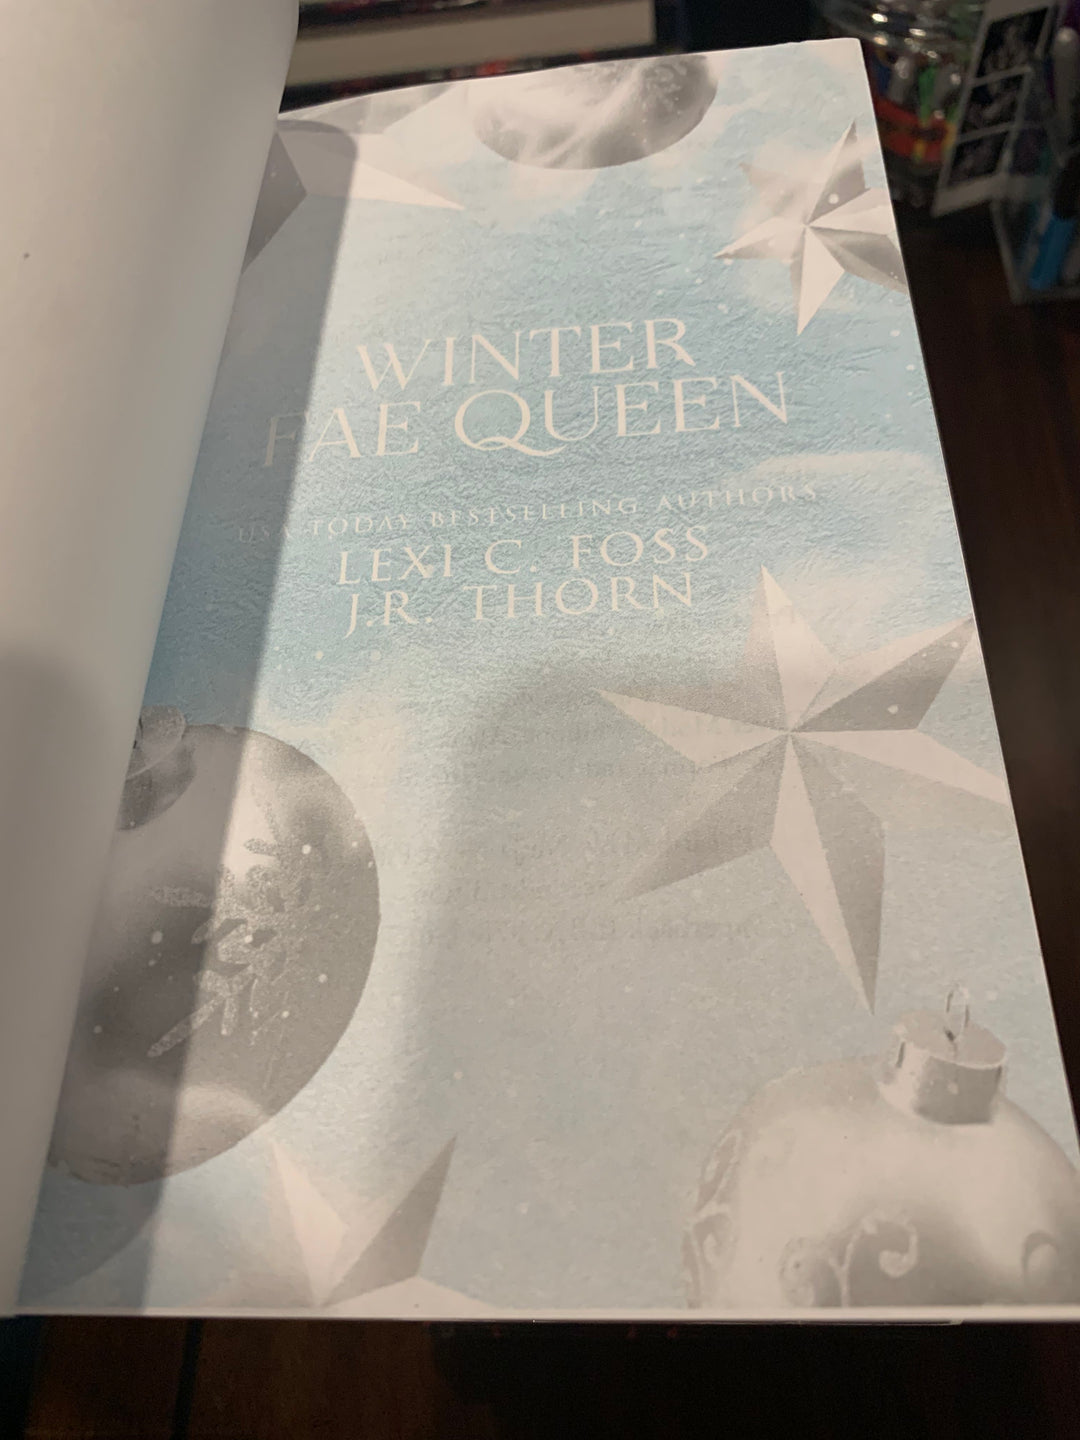 TITLE PAGE MISPRINT: Winter Fae Queen (Special Edition Paperback) by Lexi C. Foss & J.R. Thorn